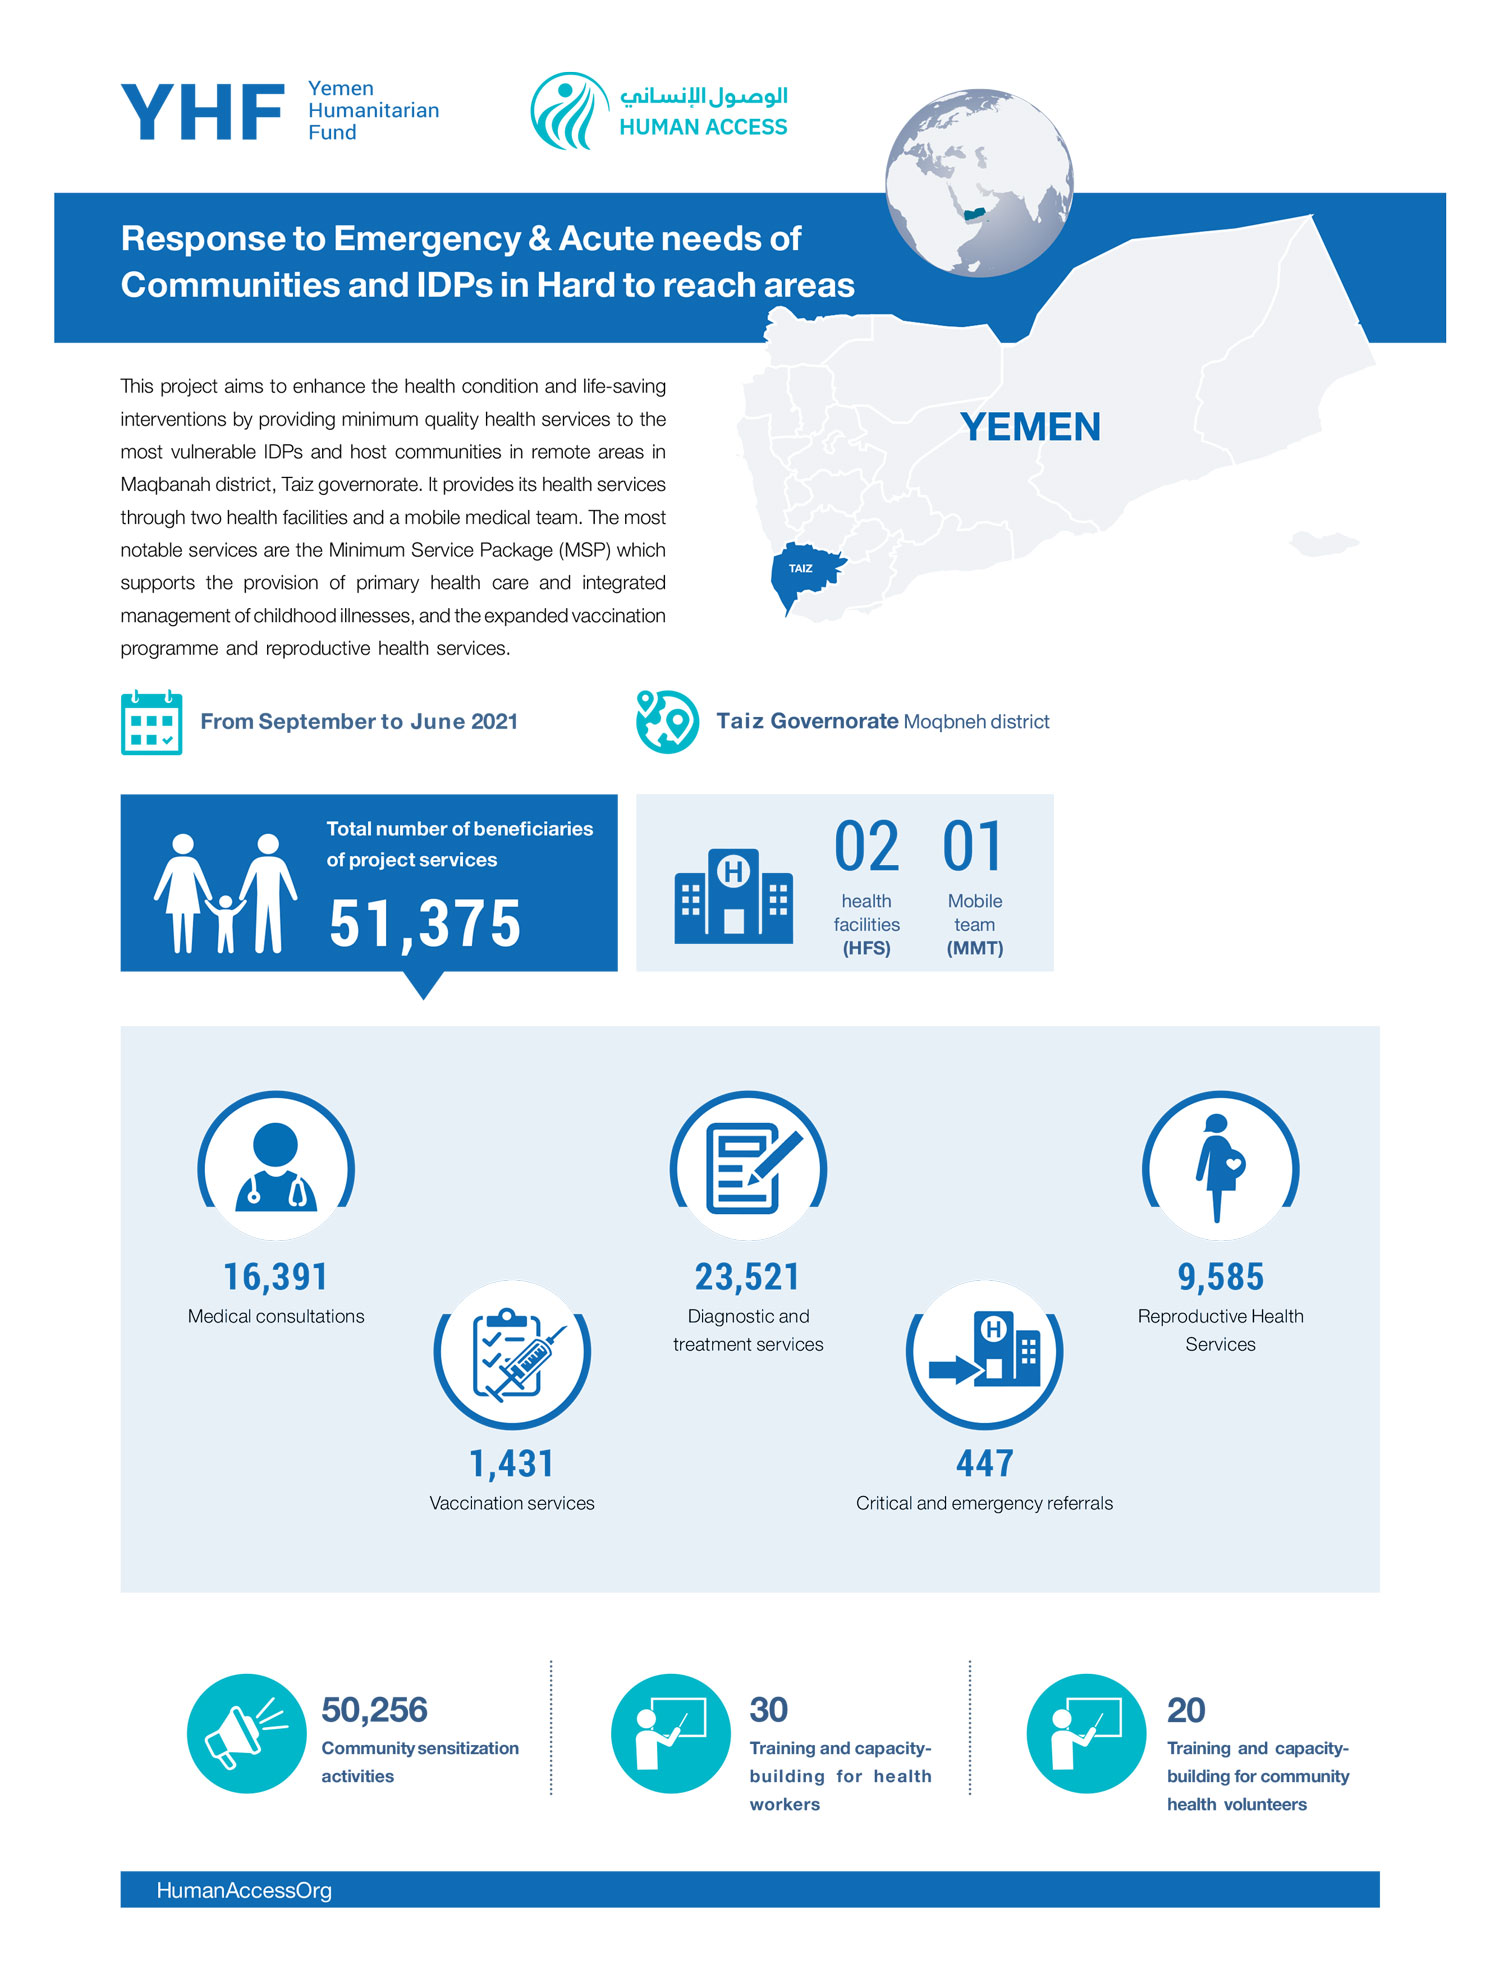 Infographic: Response to Emergency & Acute needs of Communities and IDPs in Hard to reach areas (Sep 2021- June 2022)